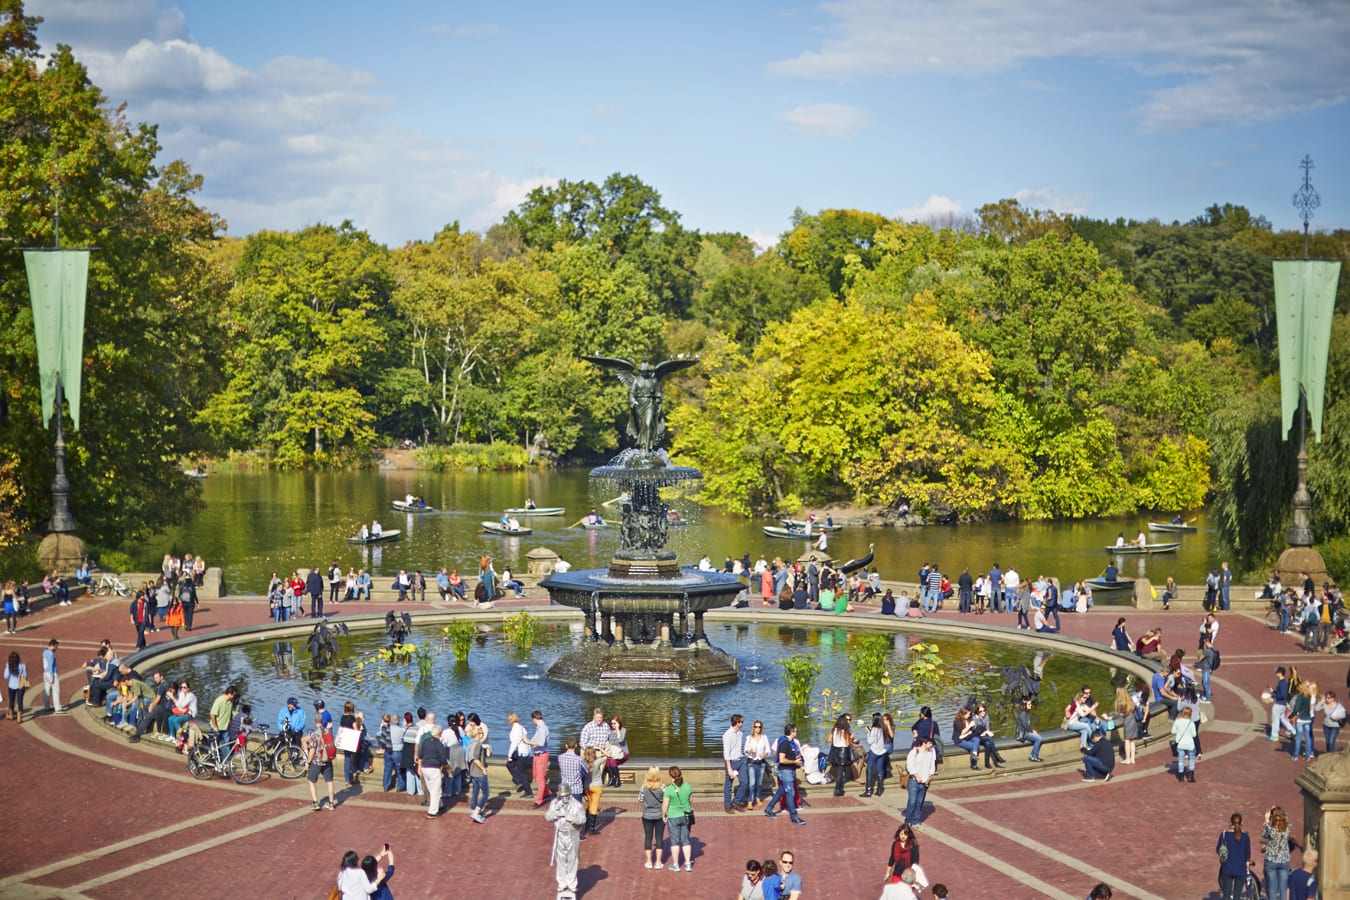 “Angel of the Waters” fountain from above. Many tourists and people are standing or sitting along this Central Park fountain.